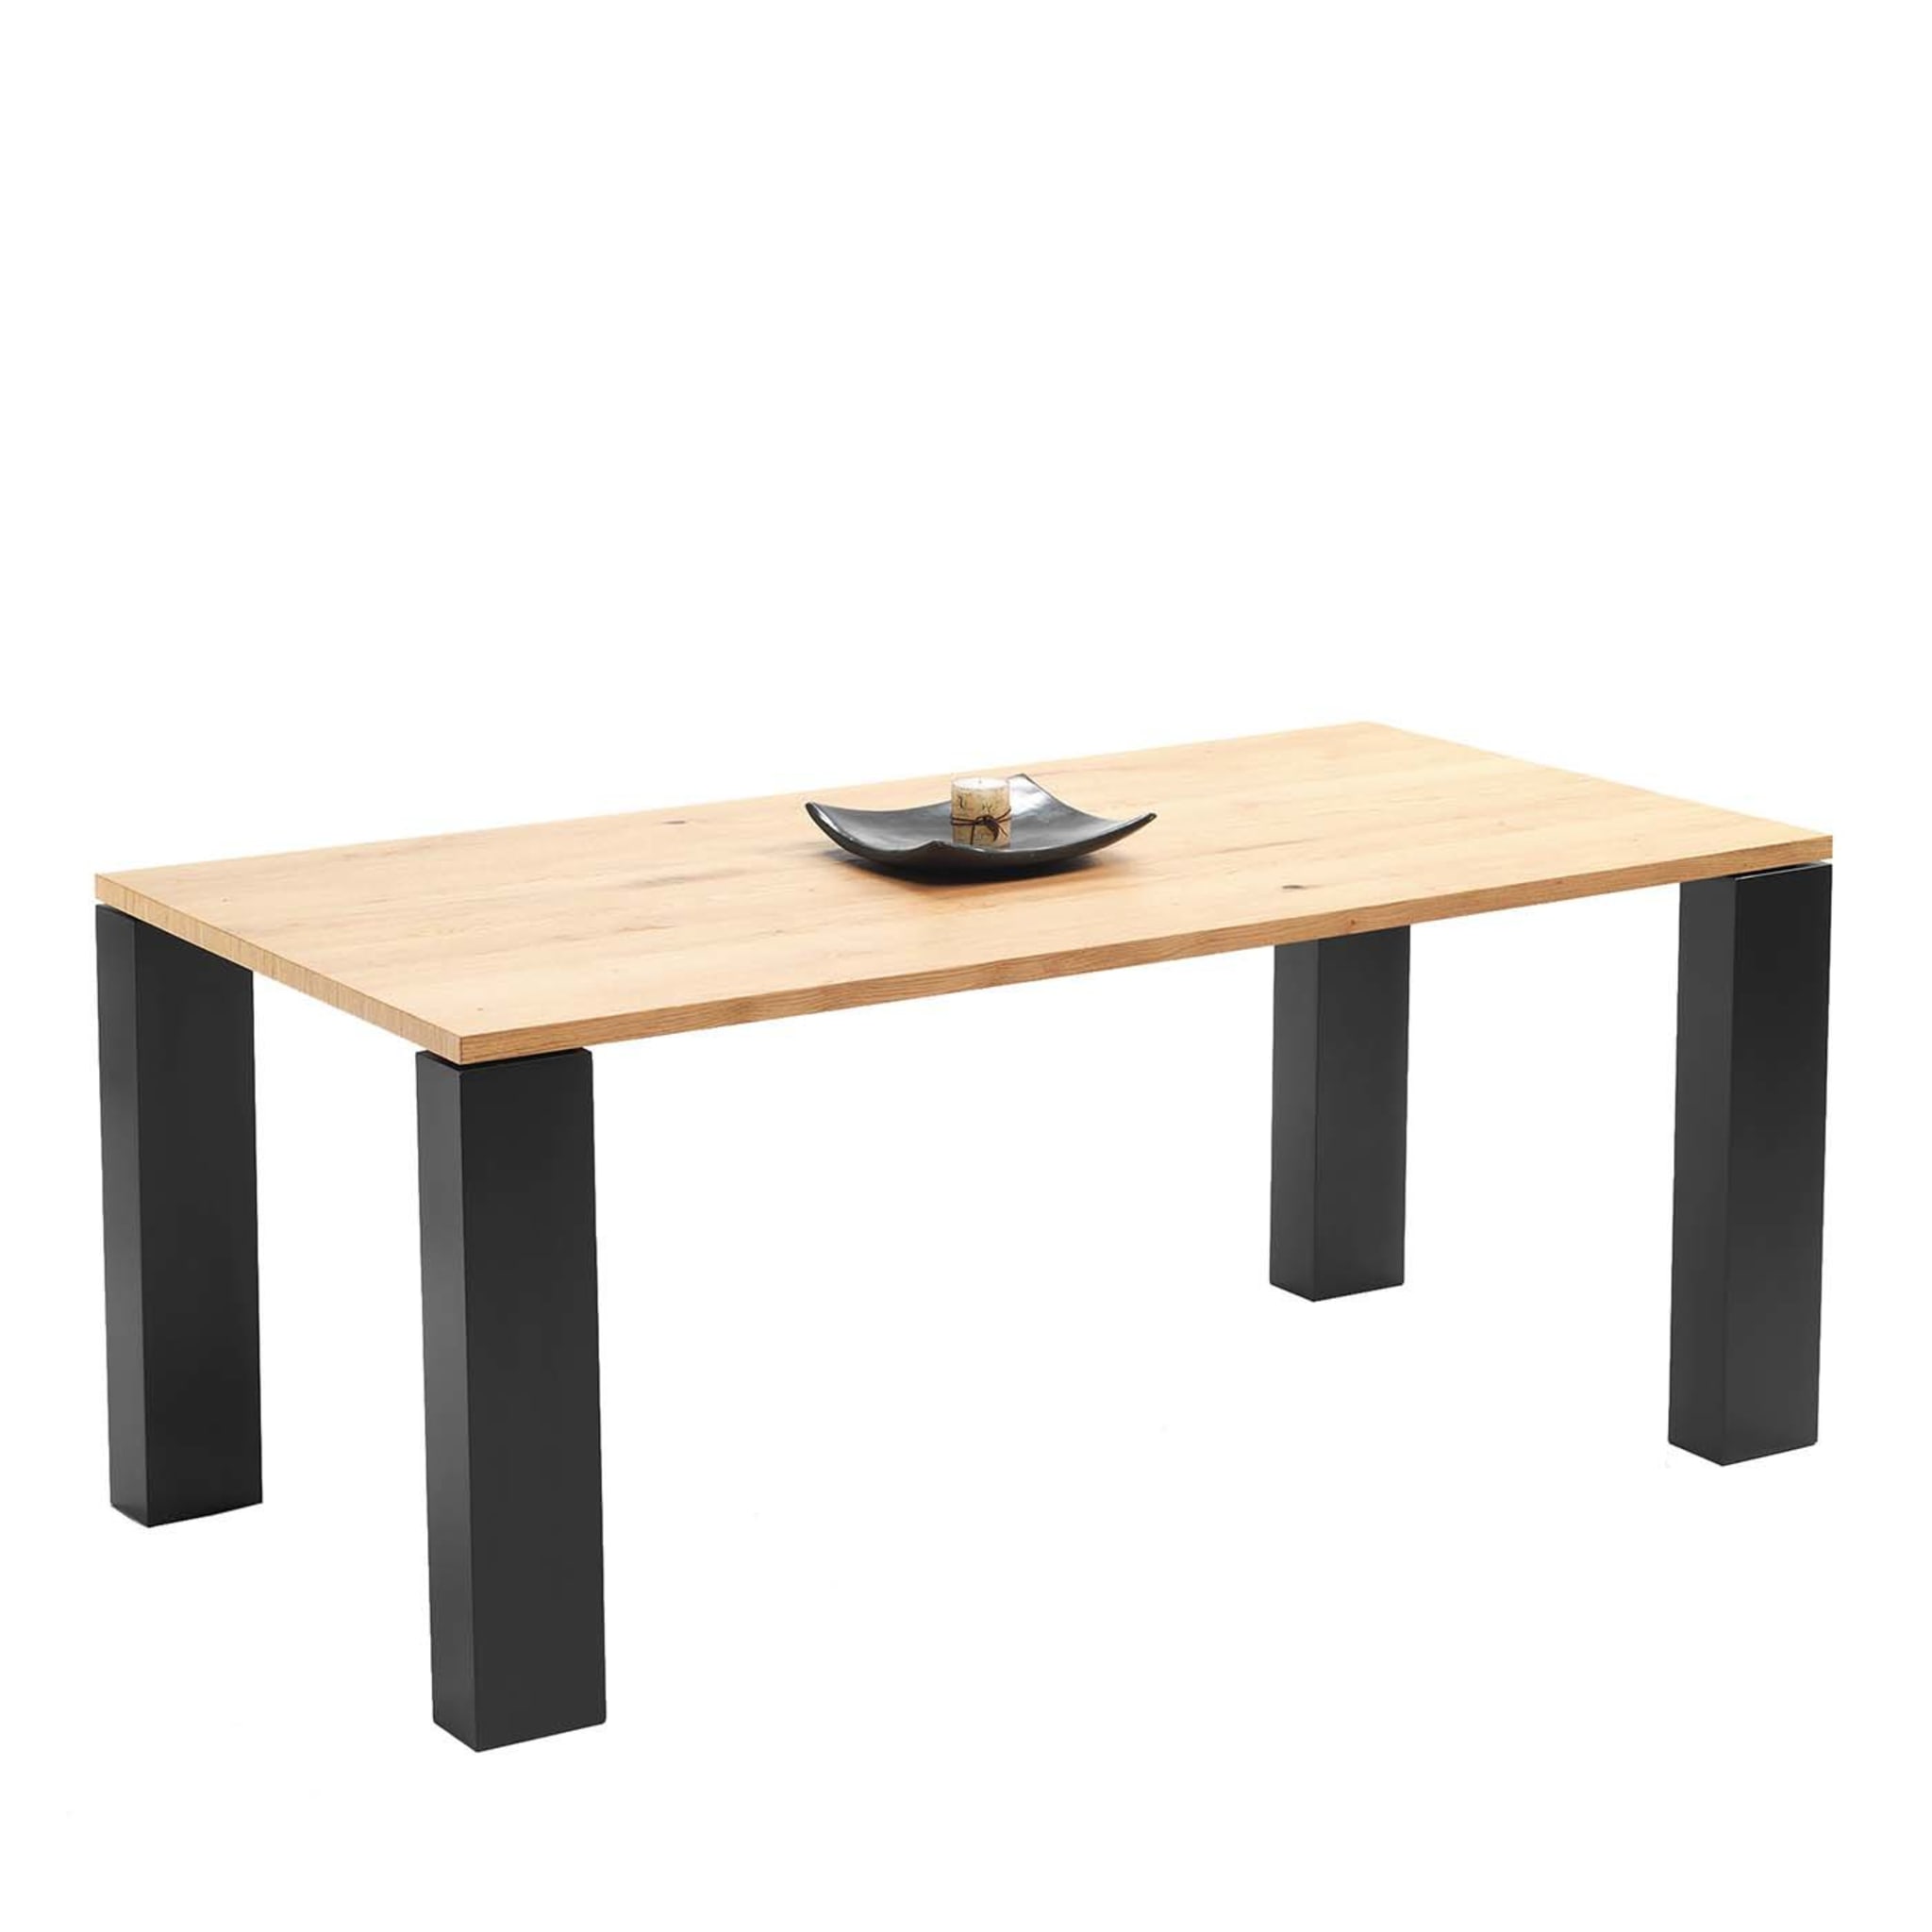 Noa Jr Dining Table - Main view